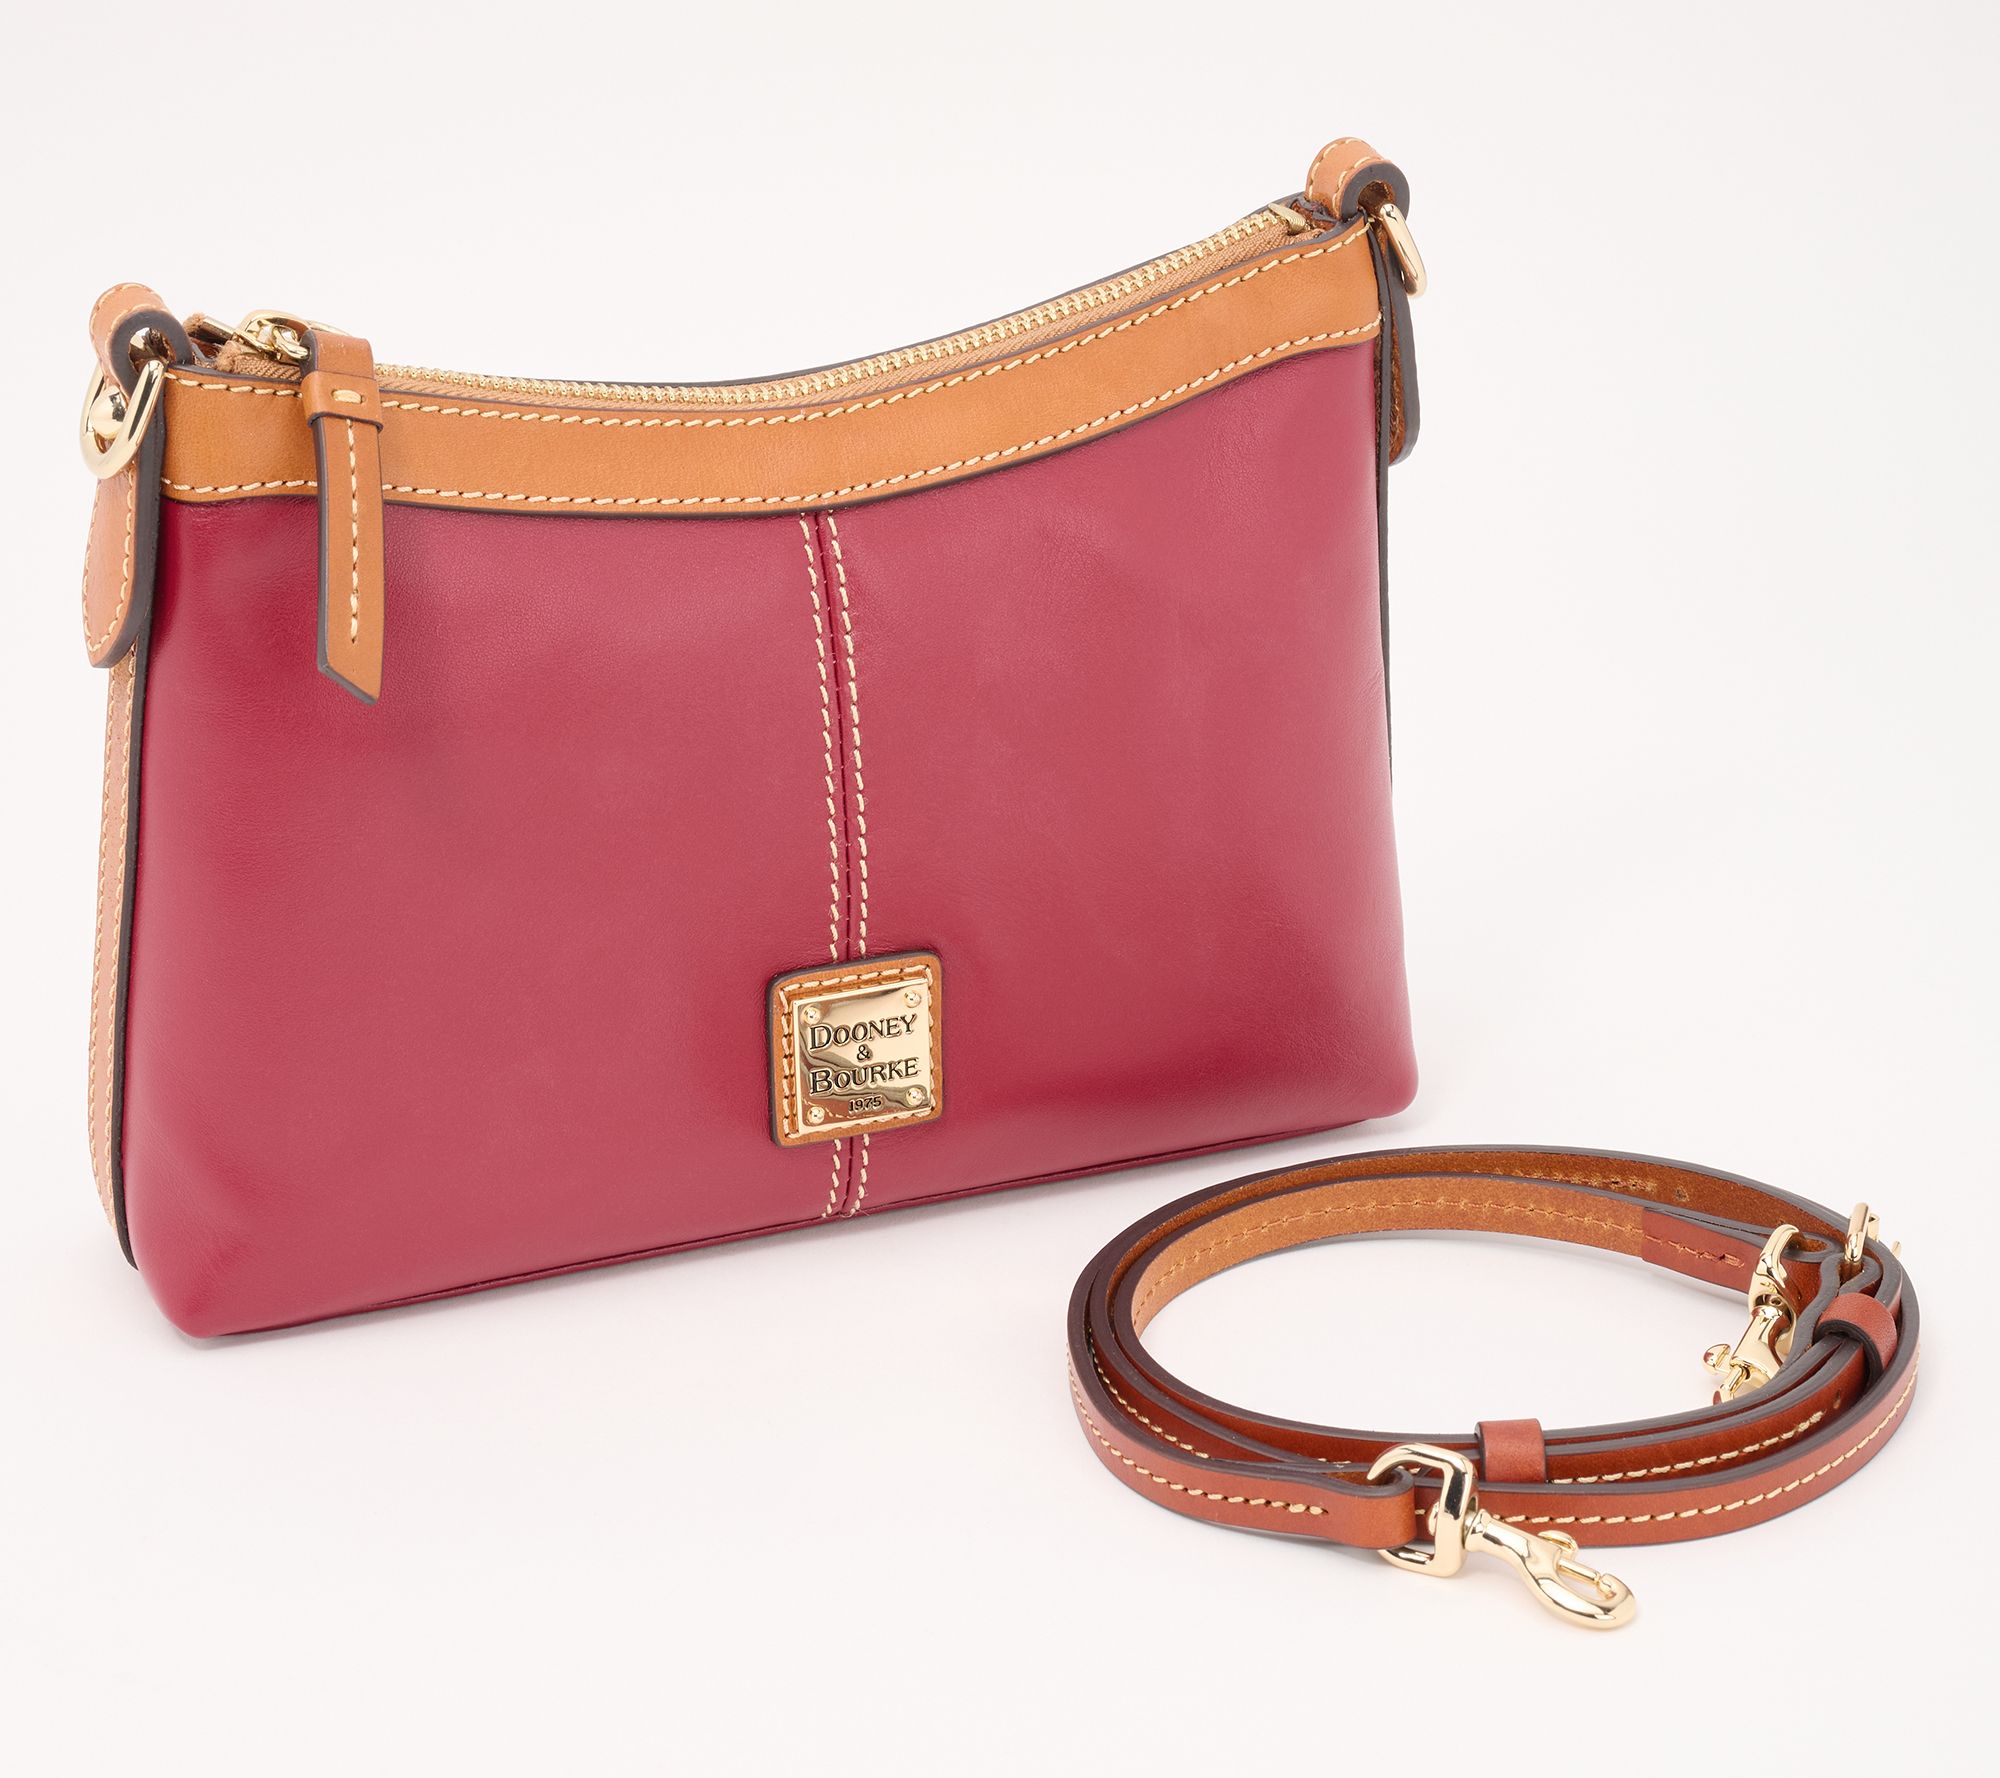 Dooney & Bourke Wexford Smooth Leather Kisslock Coin Purse on QVC